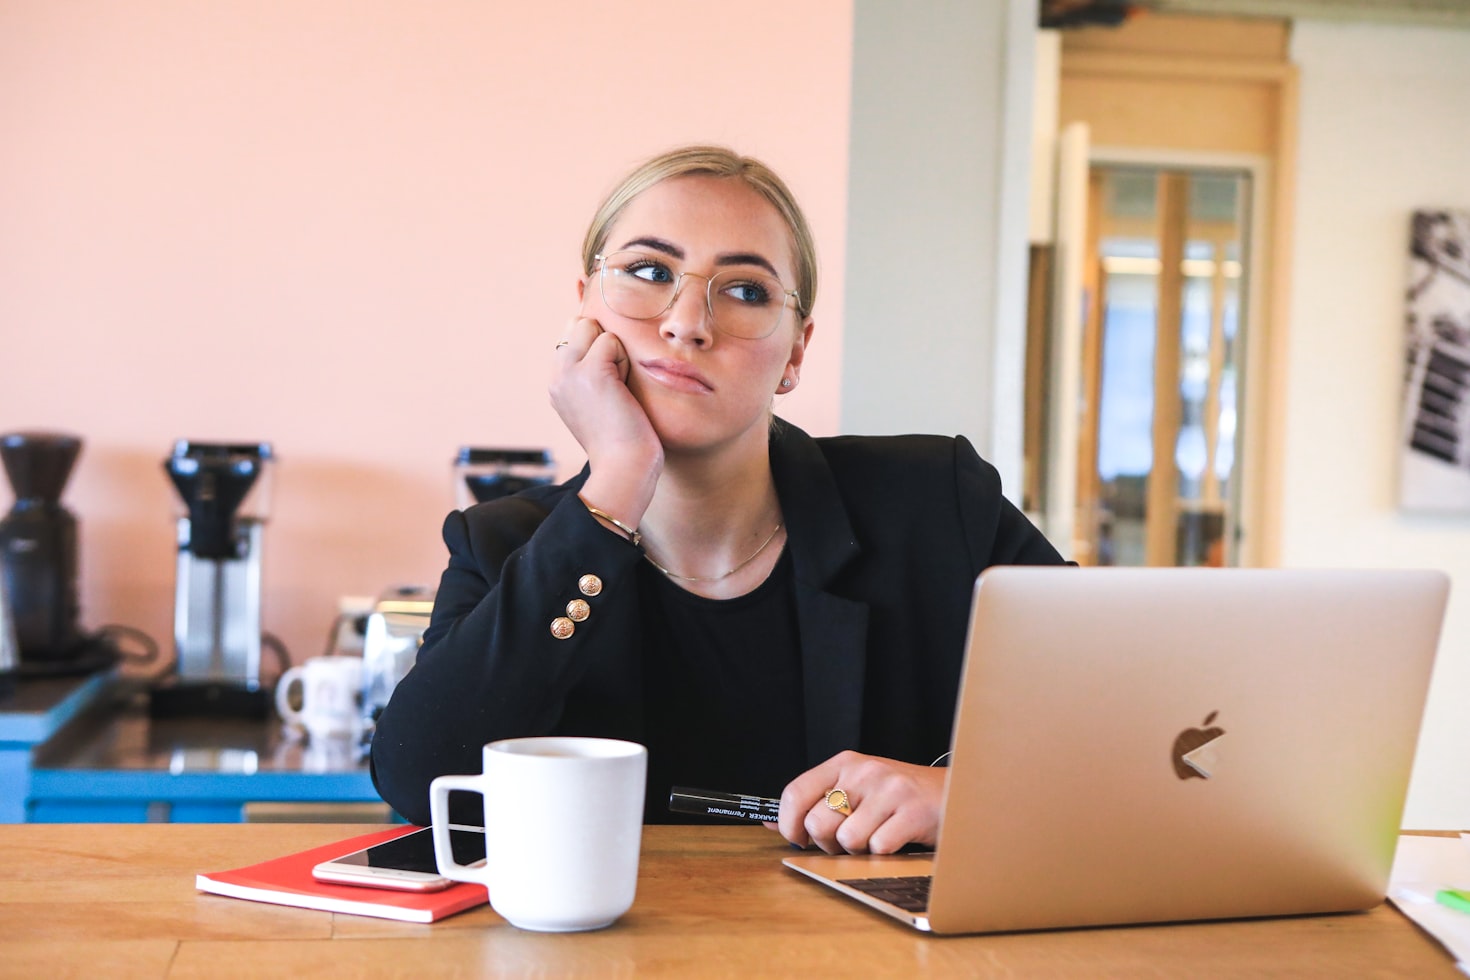 Blonde woman sitting at her desk with a coffee and MacBook, thinking